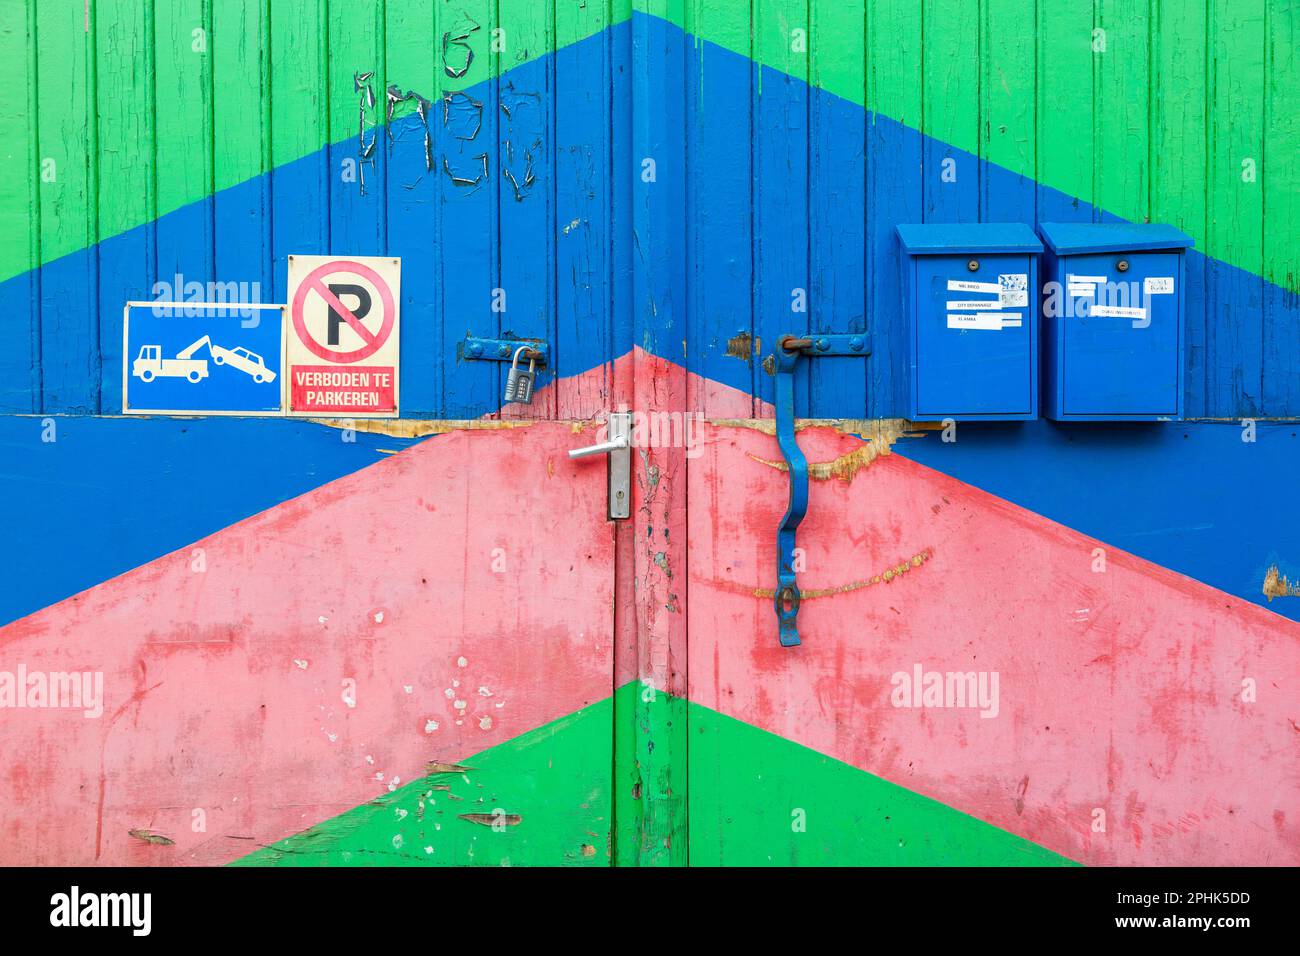 Garage door painted with wide oblique blue-green-red colored bands. Mail boxes. Brussels. Stock Photo